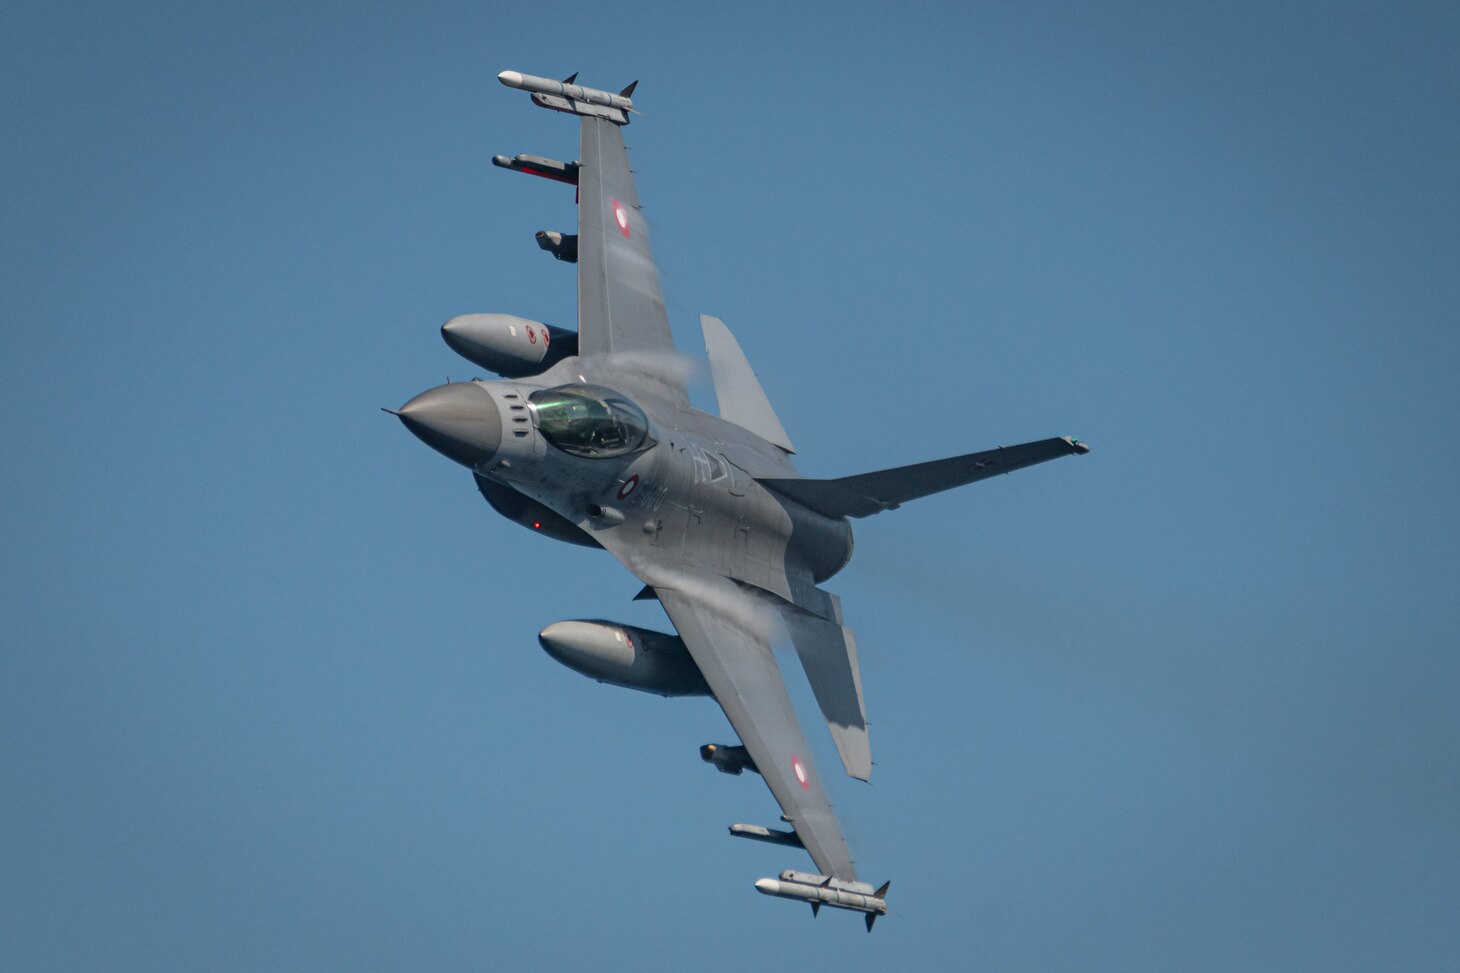 Danish F-16 Fighters participate in an Air-Defence Exercise (ADEX) with the Standing NATO Maritime Group One (SNMG1) Task Group and its consorts off the coast of Denmark on June 9th, 2021 during Exercise BALTOPS 50. BALTOPS is an annual joint, multinational maritime-focused defence exercise designed to enhance interoperability, flexibility, and demonstrate resolve among Allied and partner forces to defend the Baltic Sea Region. It involves maritime and air forces, strengthening combined response capabilities necessary to ensure regional security and stability.